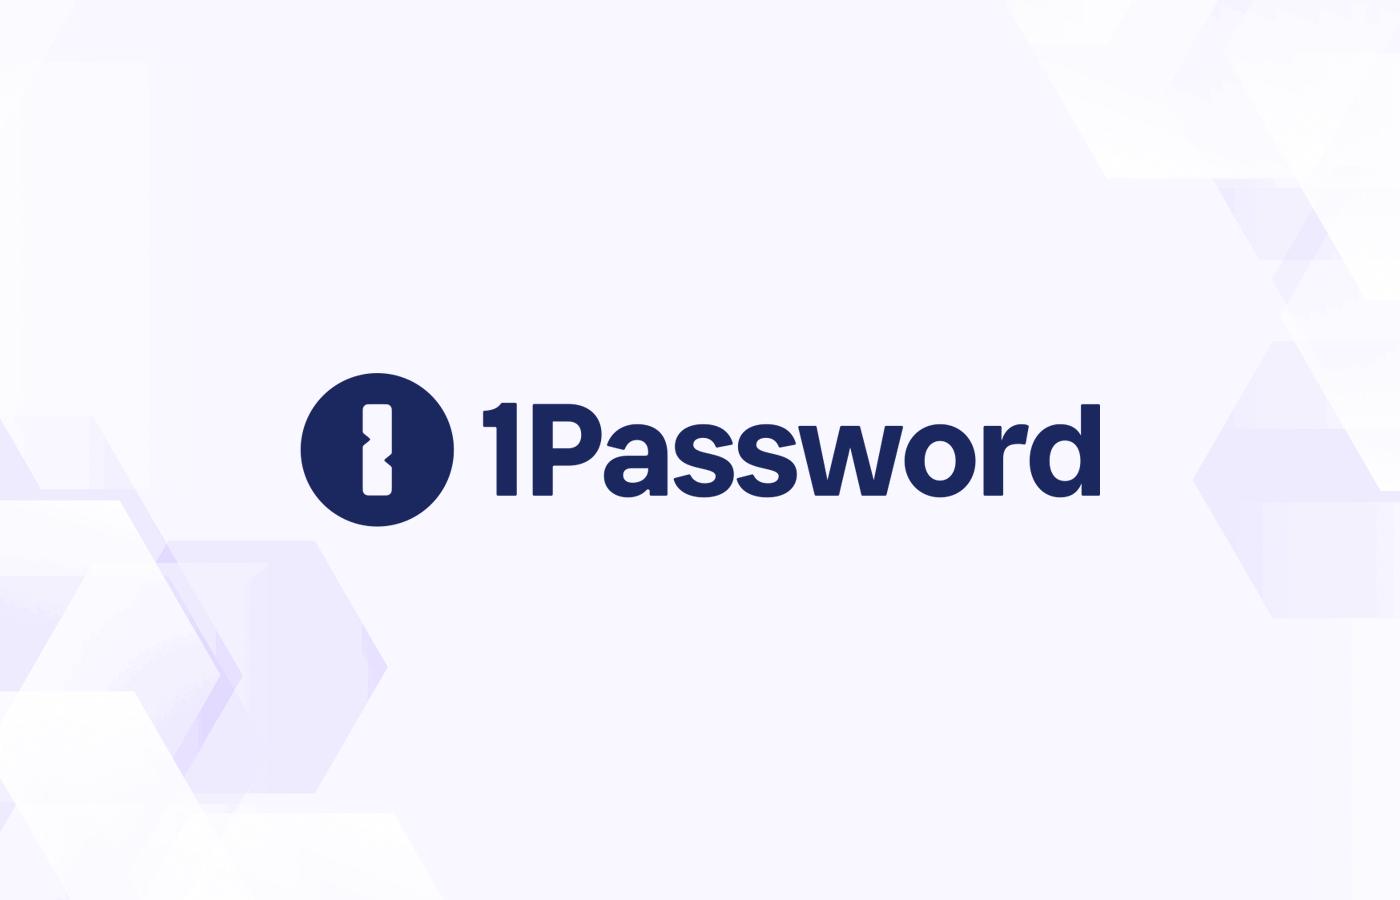 Review graphic featuring 1Password logo.